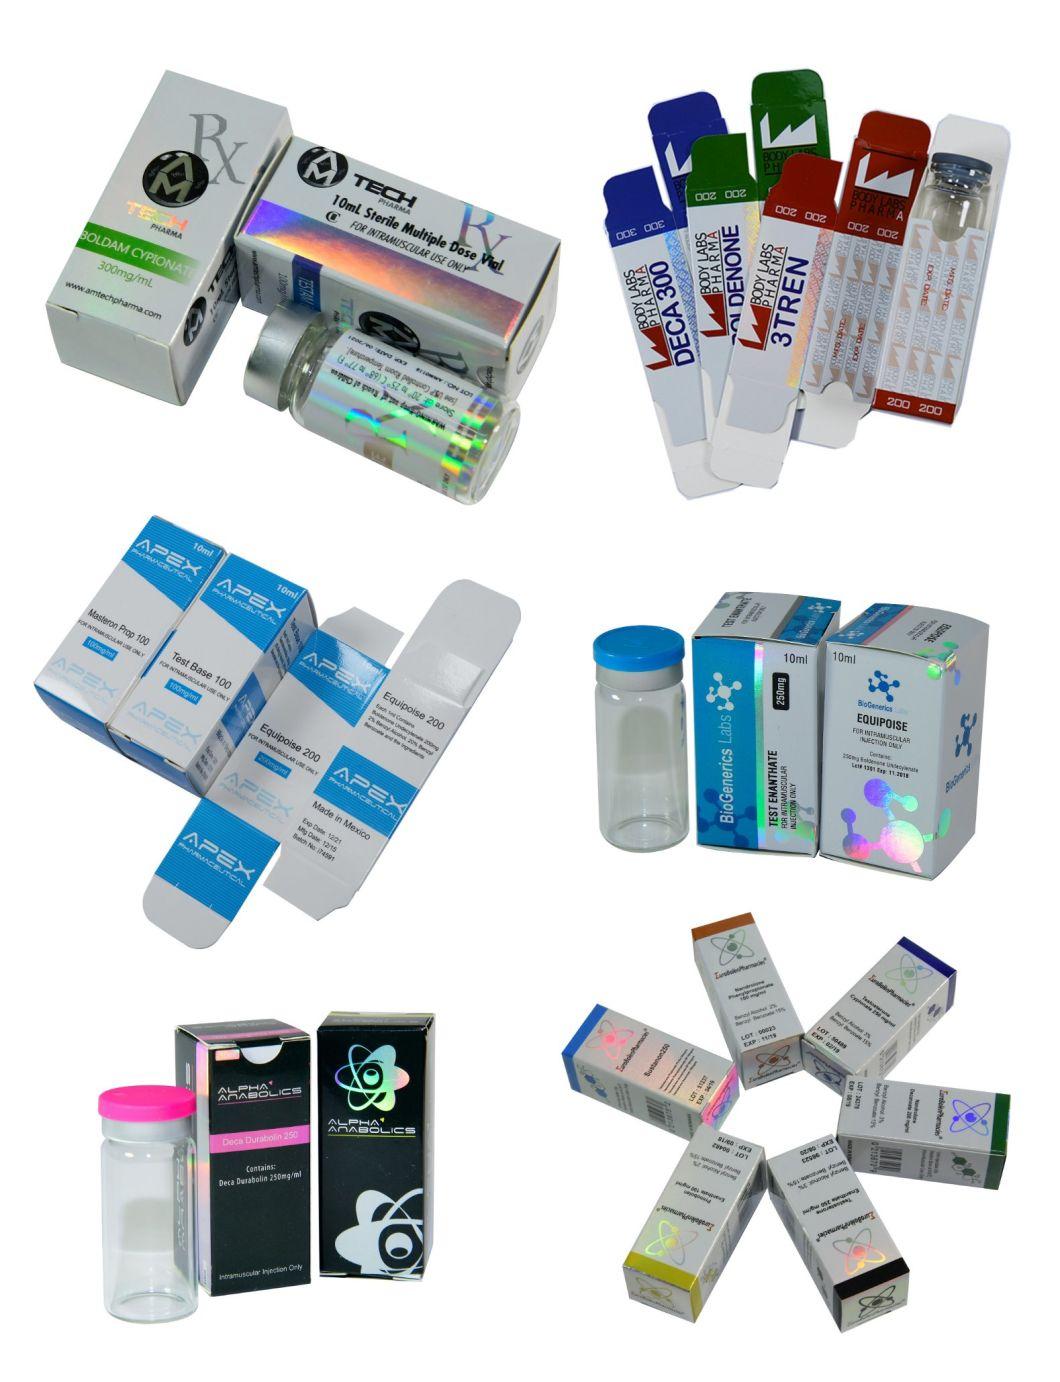 Promotion Pharma Brand 10ml Vial Steroid Labels and Boxes